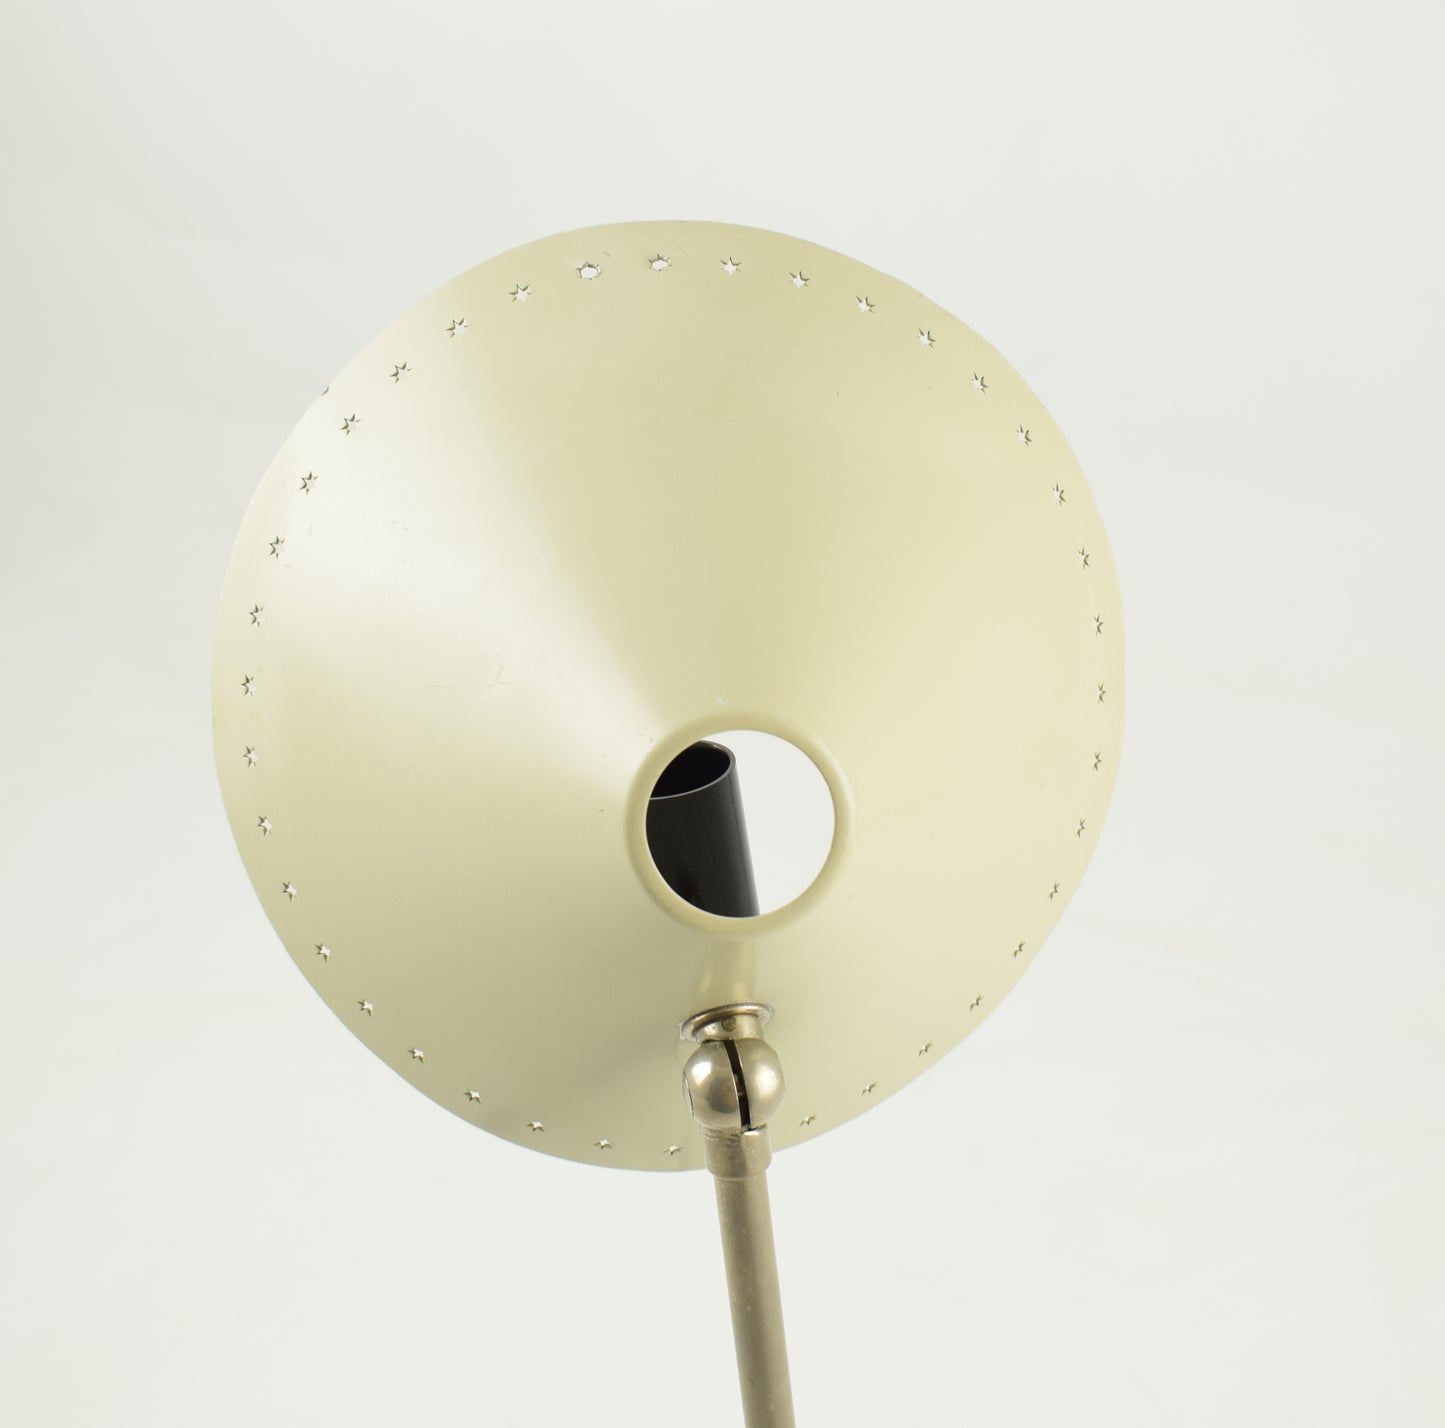 creme-white Pinocchio wall or table lamp designed in 1956 by H.Th.A. Busquet